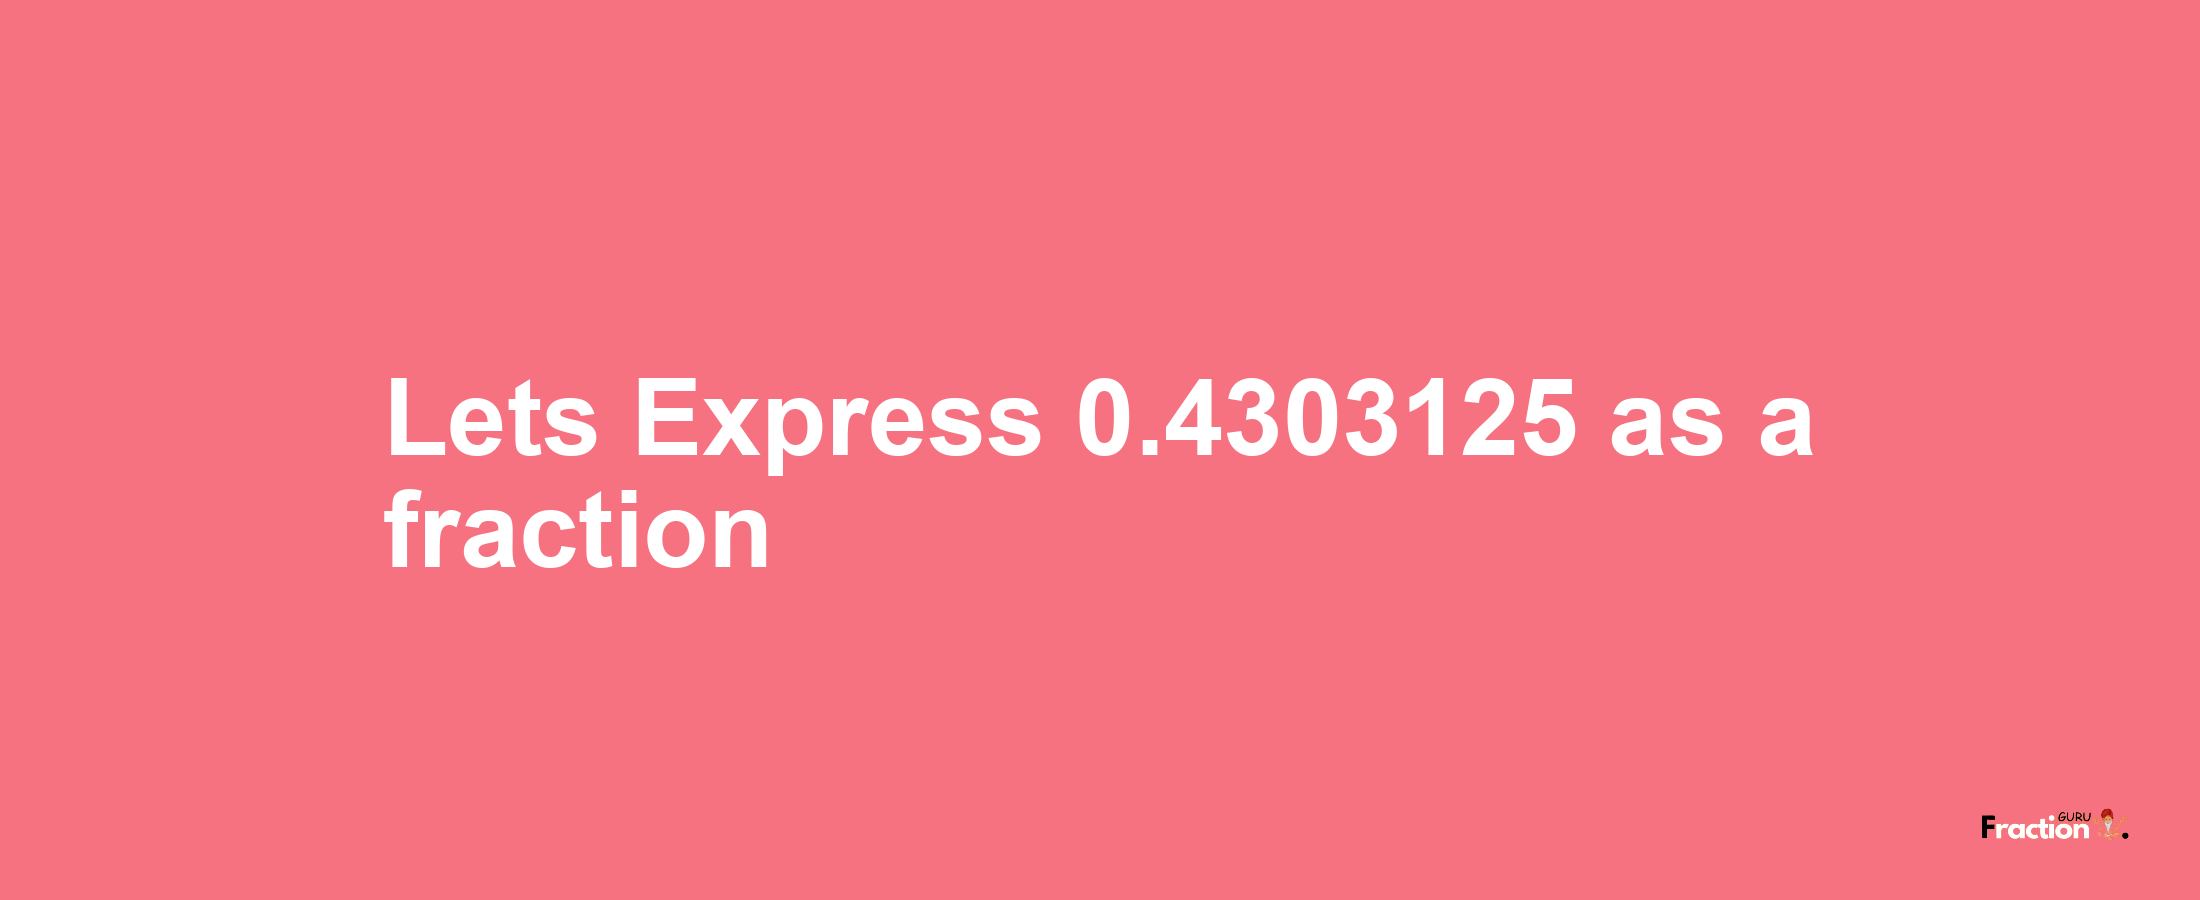 Lets Express 0.4303125 as afraction